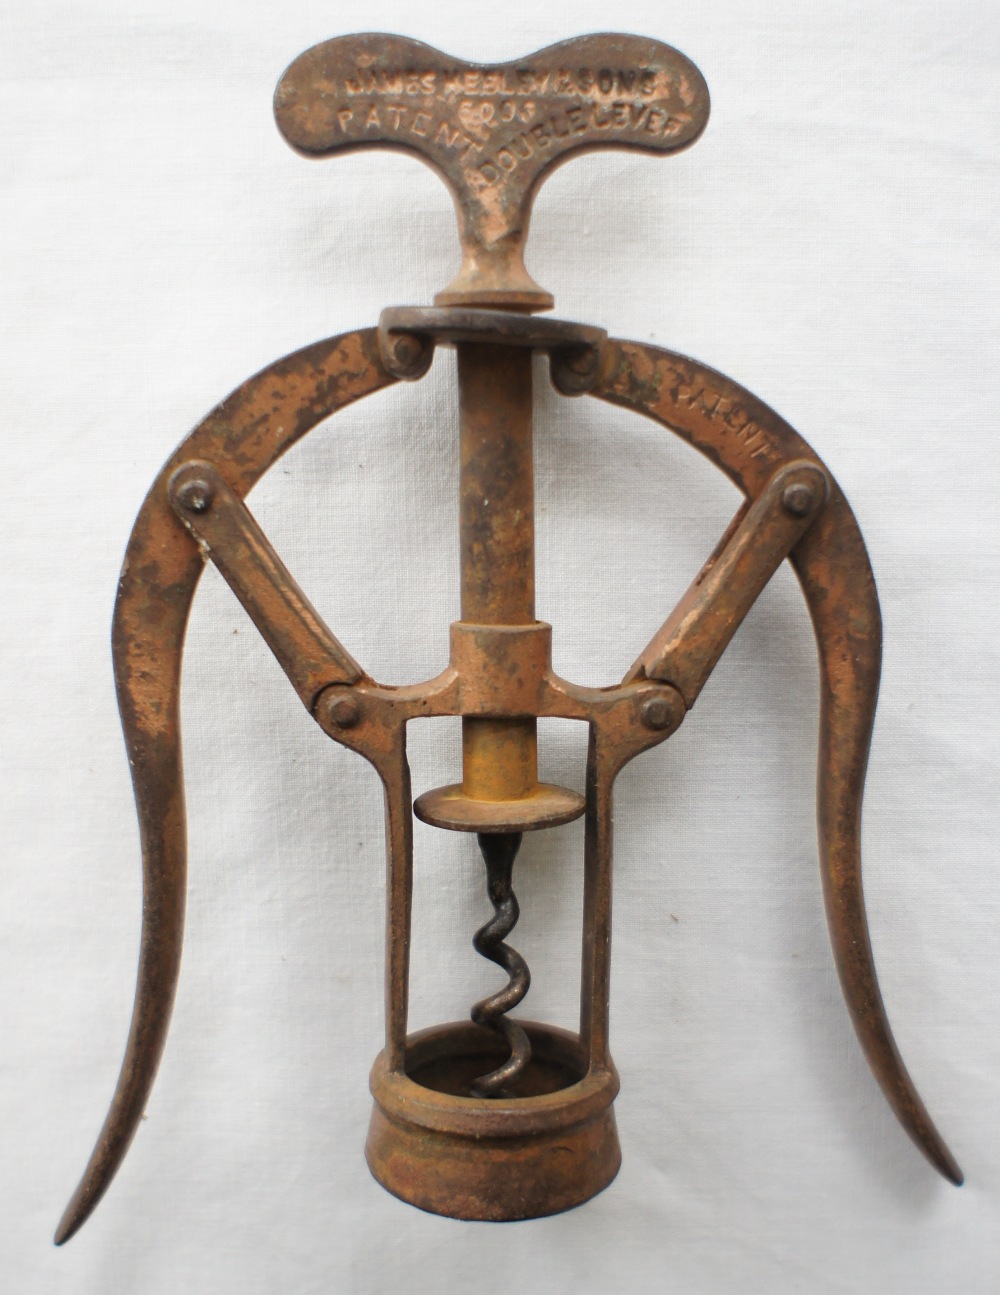 A double lever corkscrew by James Heeley & Sons, marked PATENT 6006